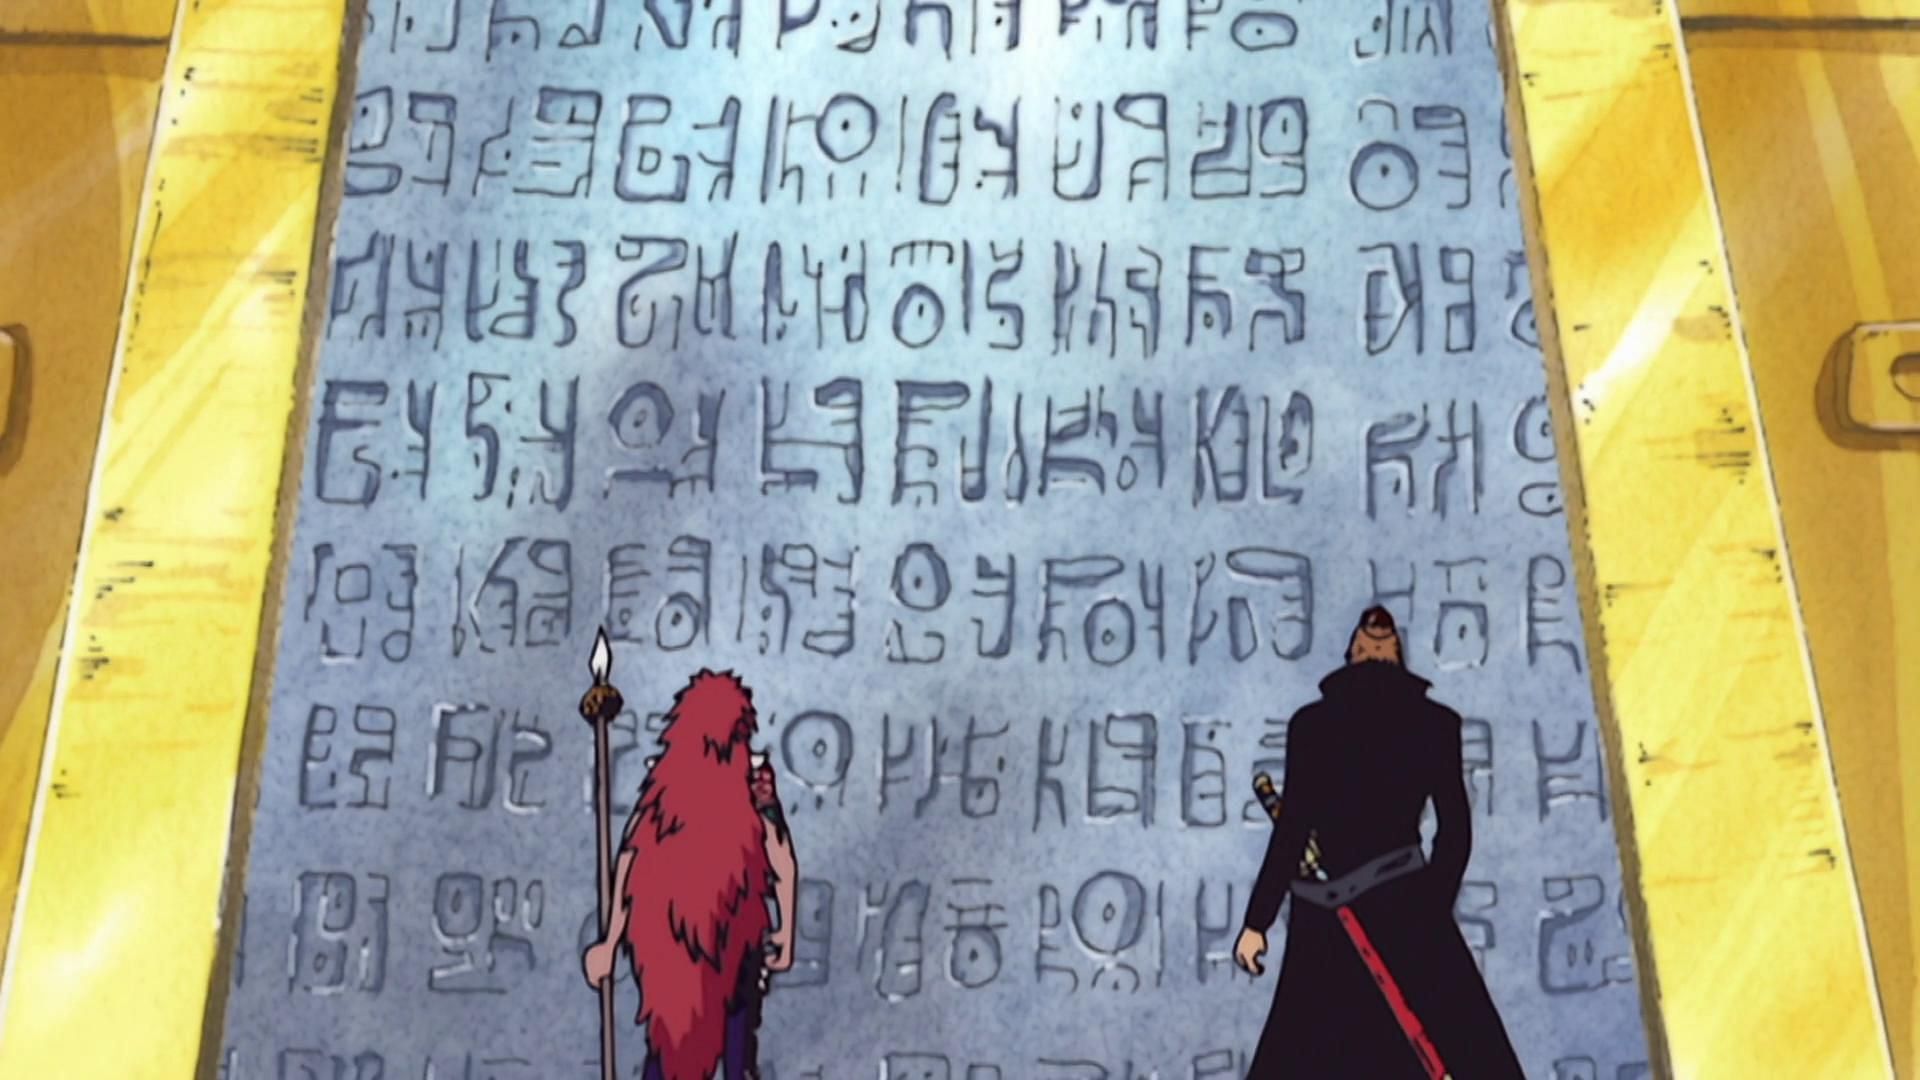 One Piece: Where Is the Final Road Poneglyph - and Who Has It?